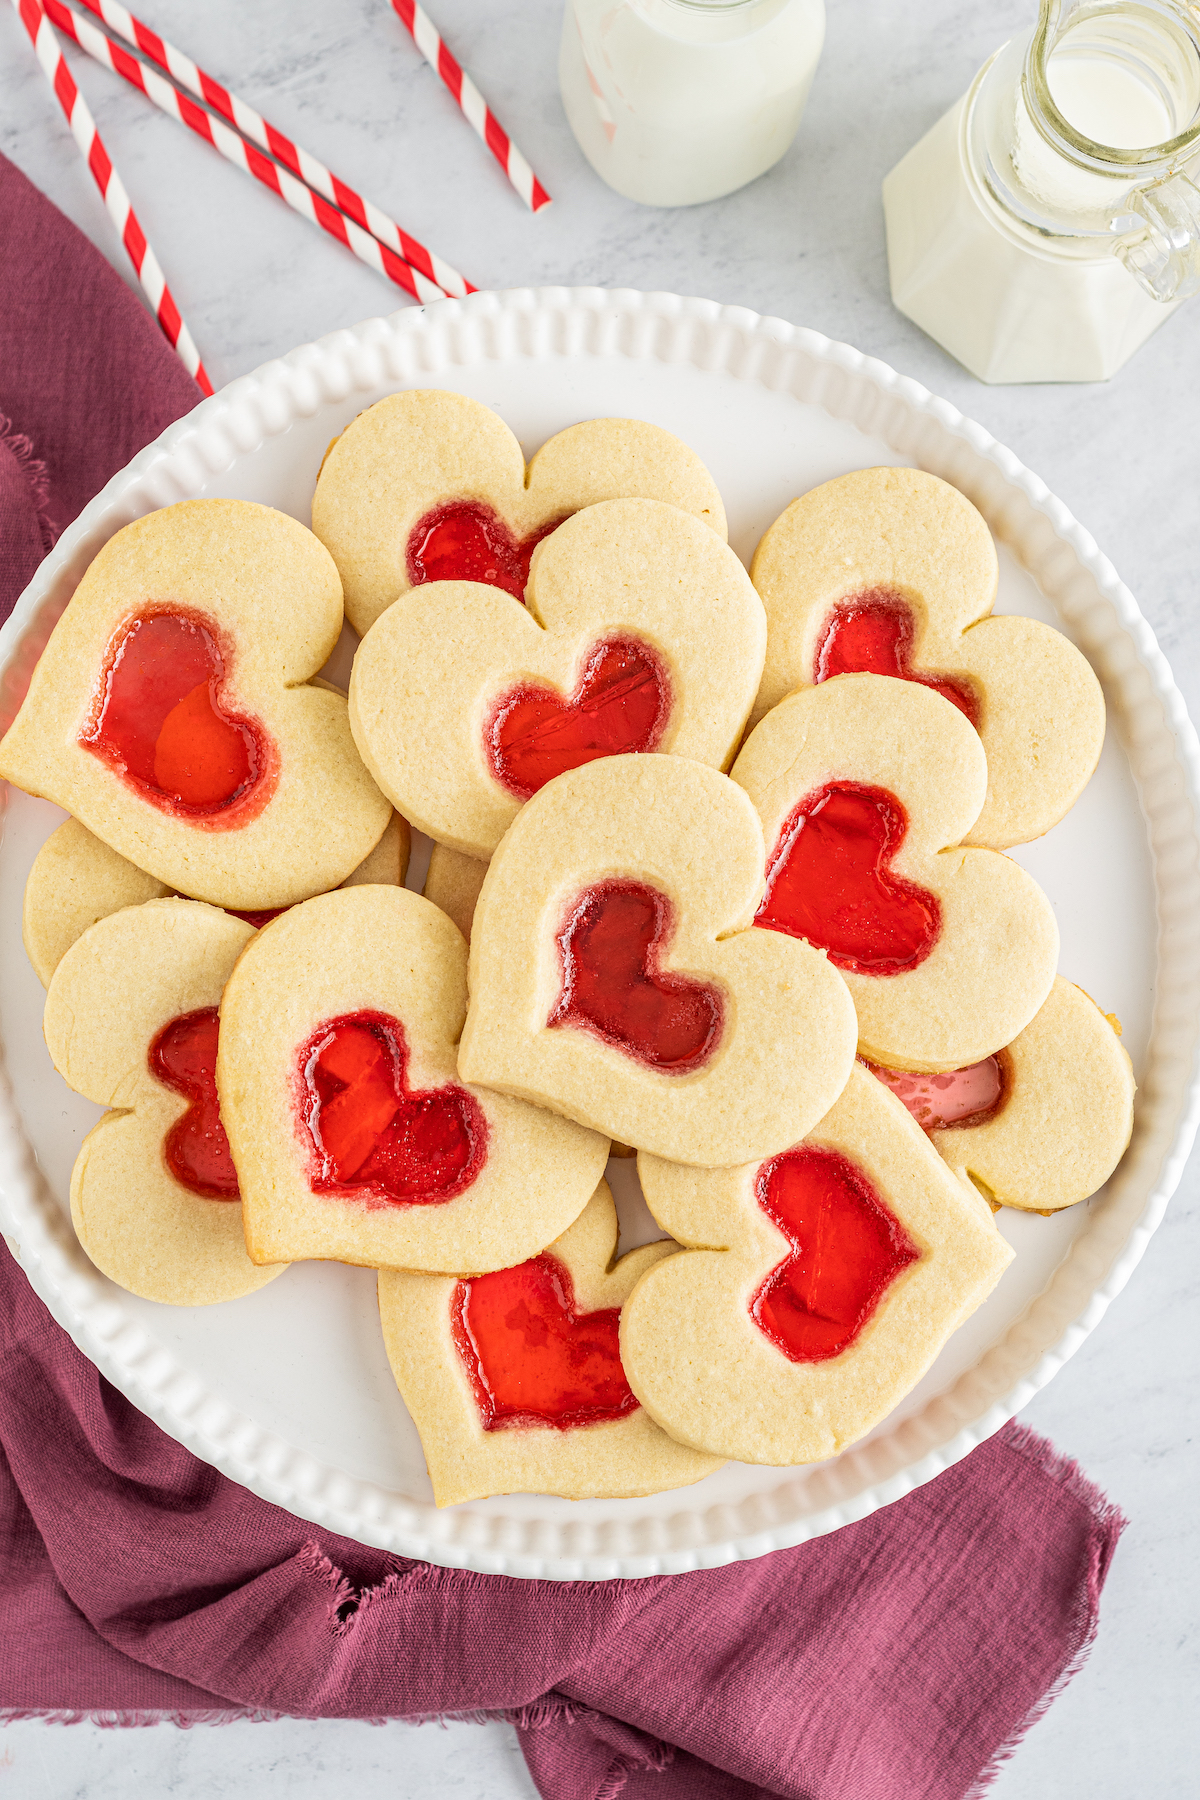 A round white plate with stained glass heart cookies on it.